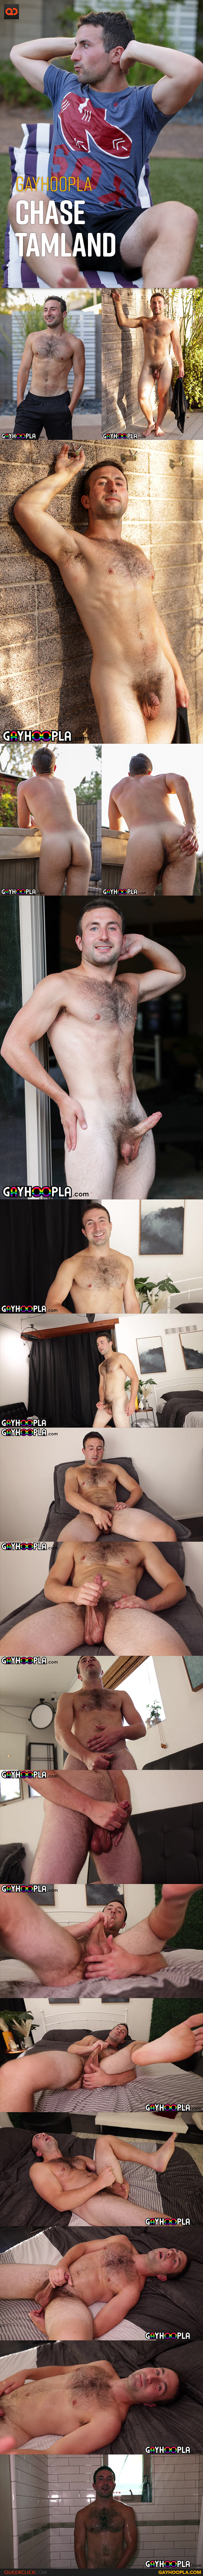 Gayhoopla: Chase Tamland - Chase Gets Turned On by the Camera Guy